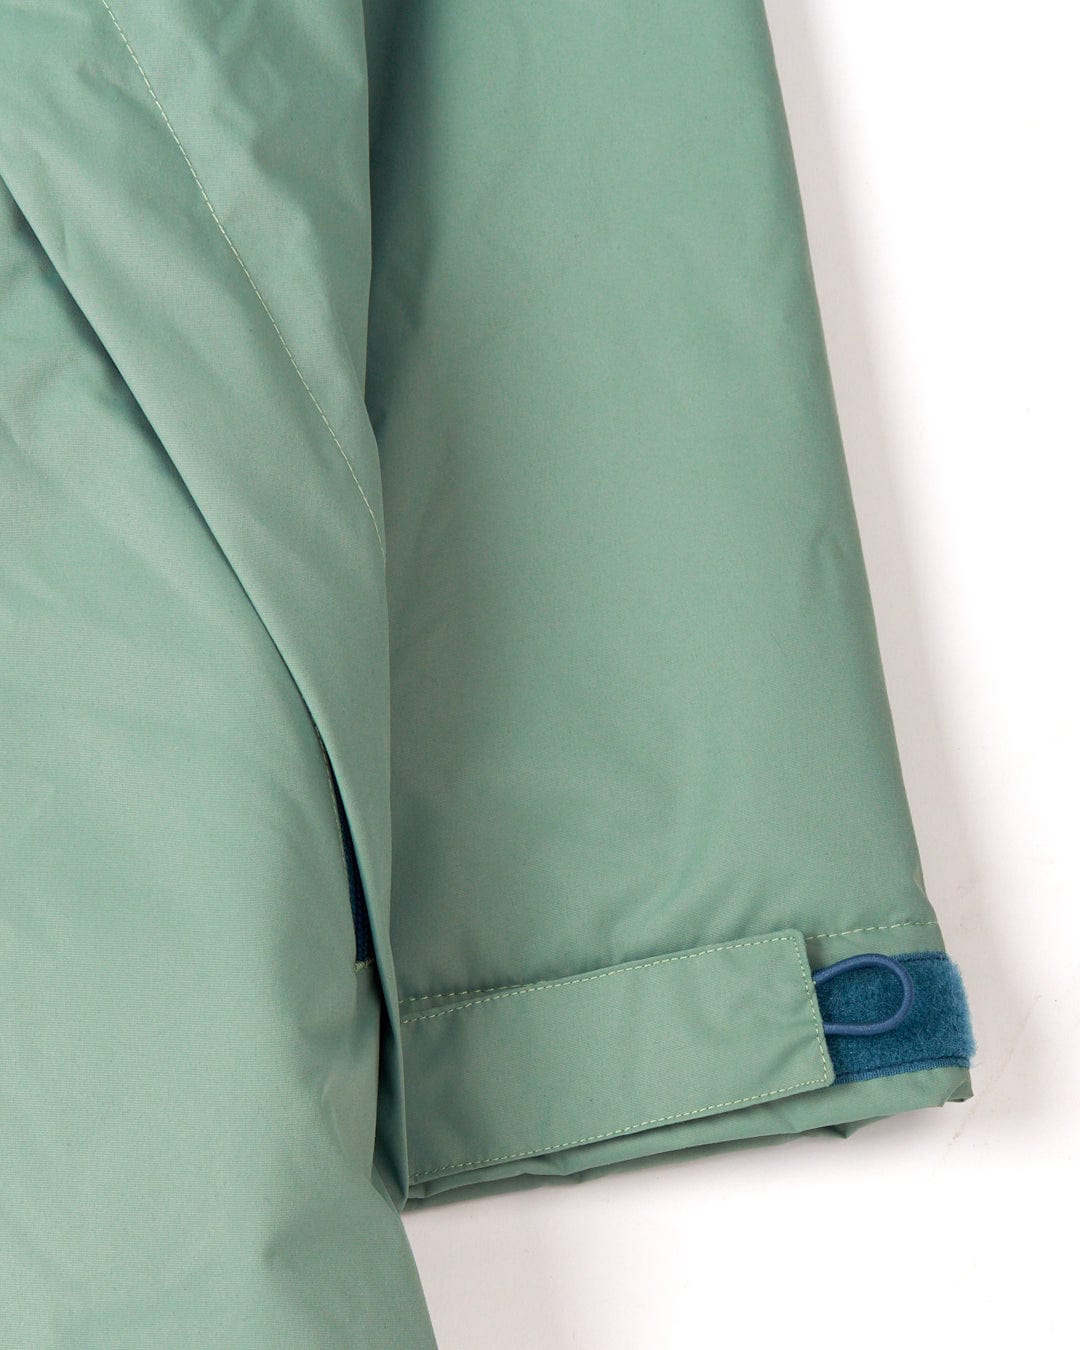 Close-up of a Recycled Four Seasons Changing Robe - Light Green sleeve with blue velcro strap details, made by Saltrock.